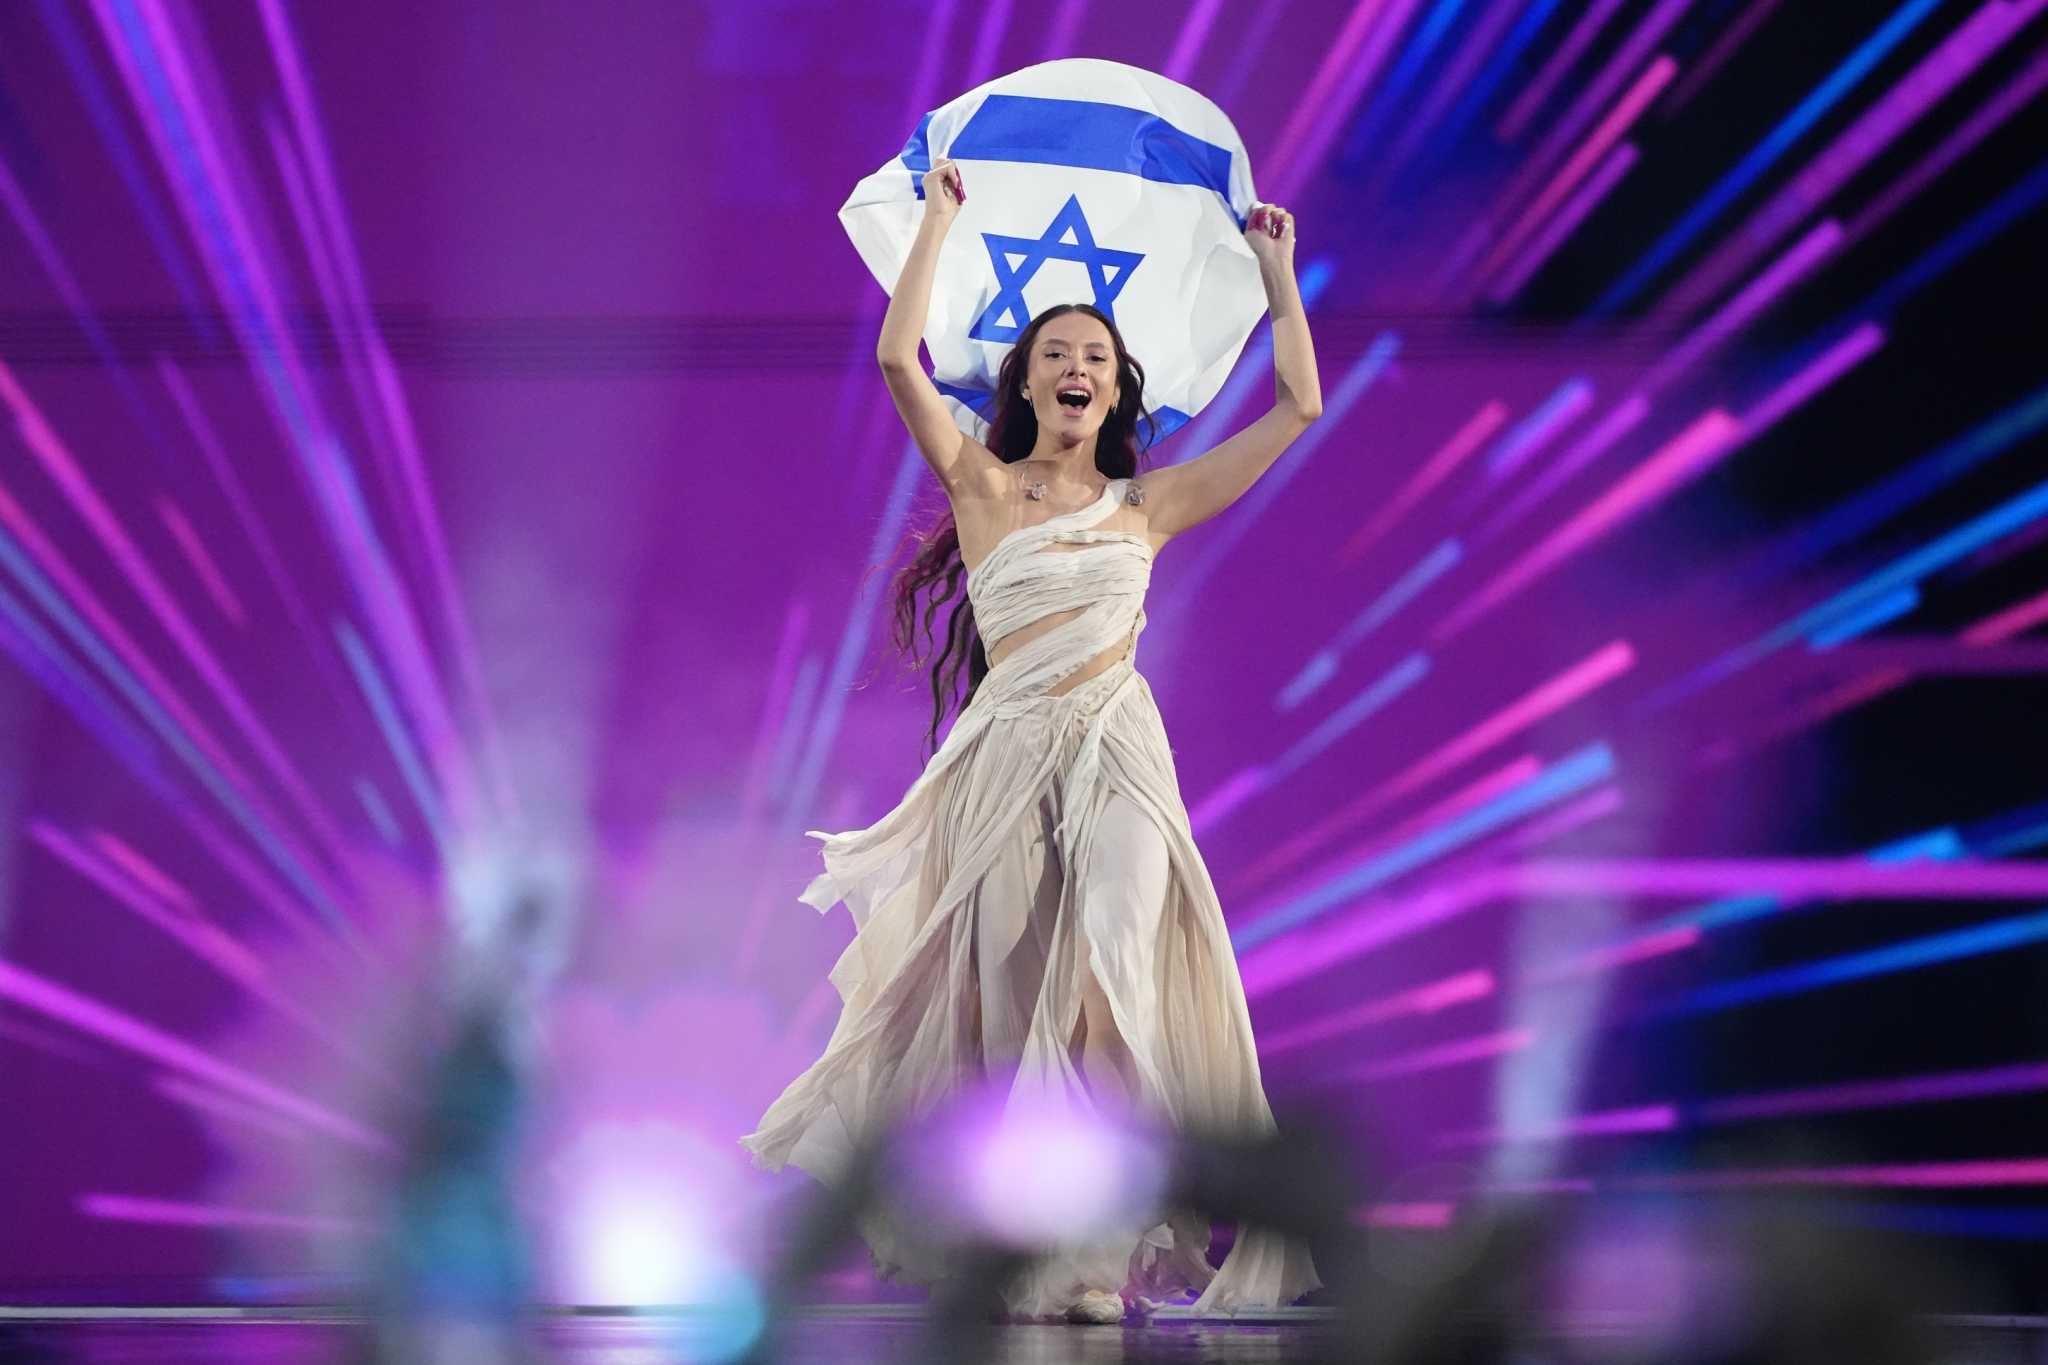 Switzerland’s Nemo wins 68th Eurovision Song Contest after event roiled by protests over Gaza war